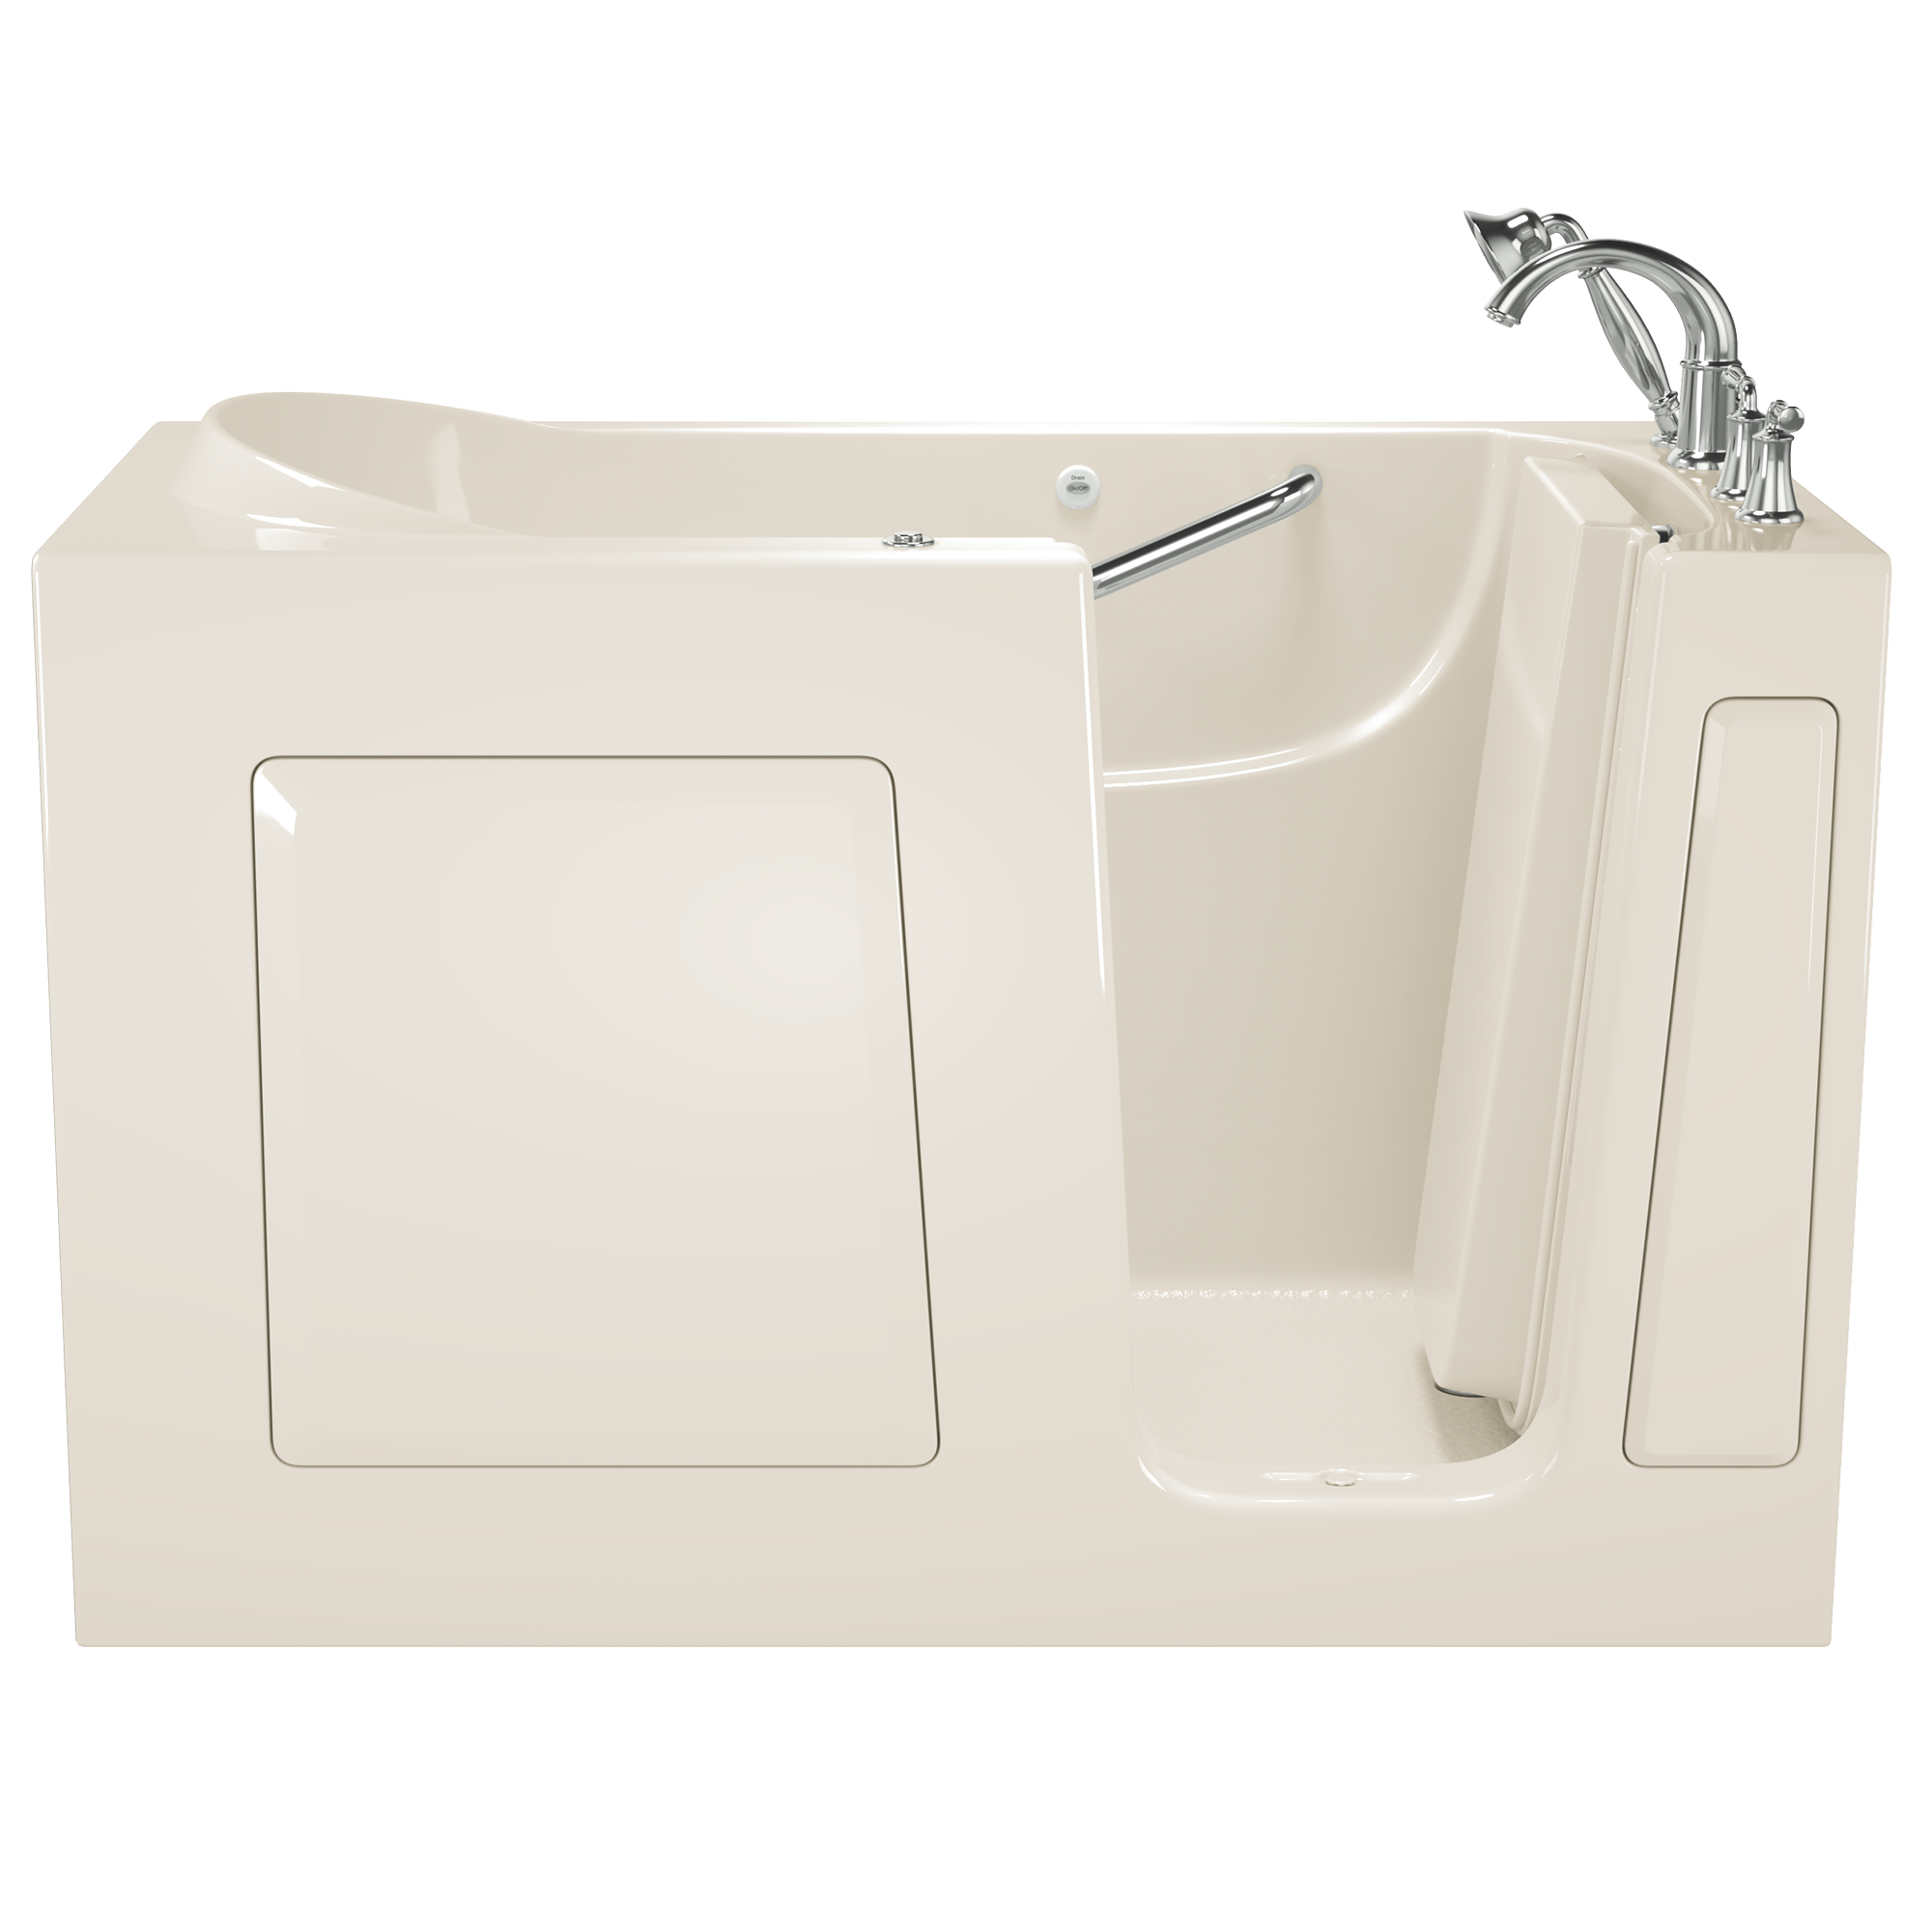 Gelcoat Value Series 30x60 Inch Walk In Bathtub with Air Spa System   Right Hand Door and Drain WIB LINEN